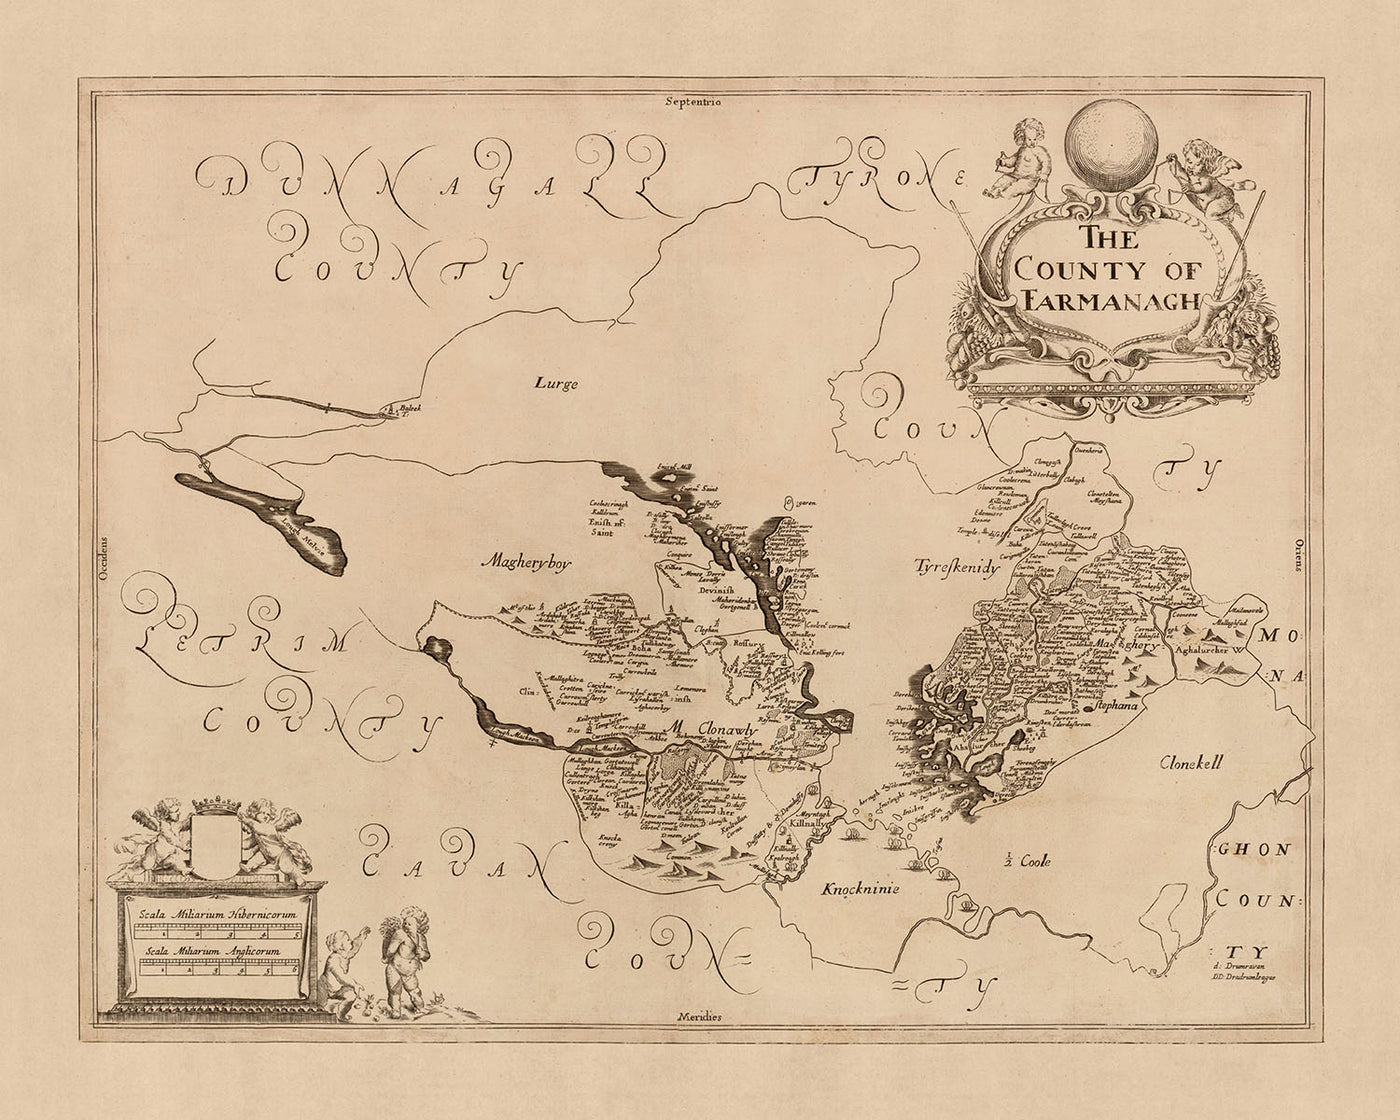 Old Map of County Fermanagh by Petty, 1685: Enniskillen, Castle Coole, Crom Estate, Florence Court, Lough Erne